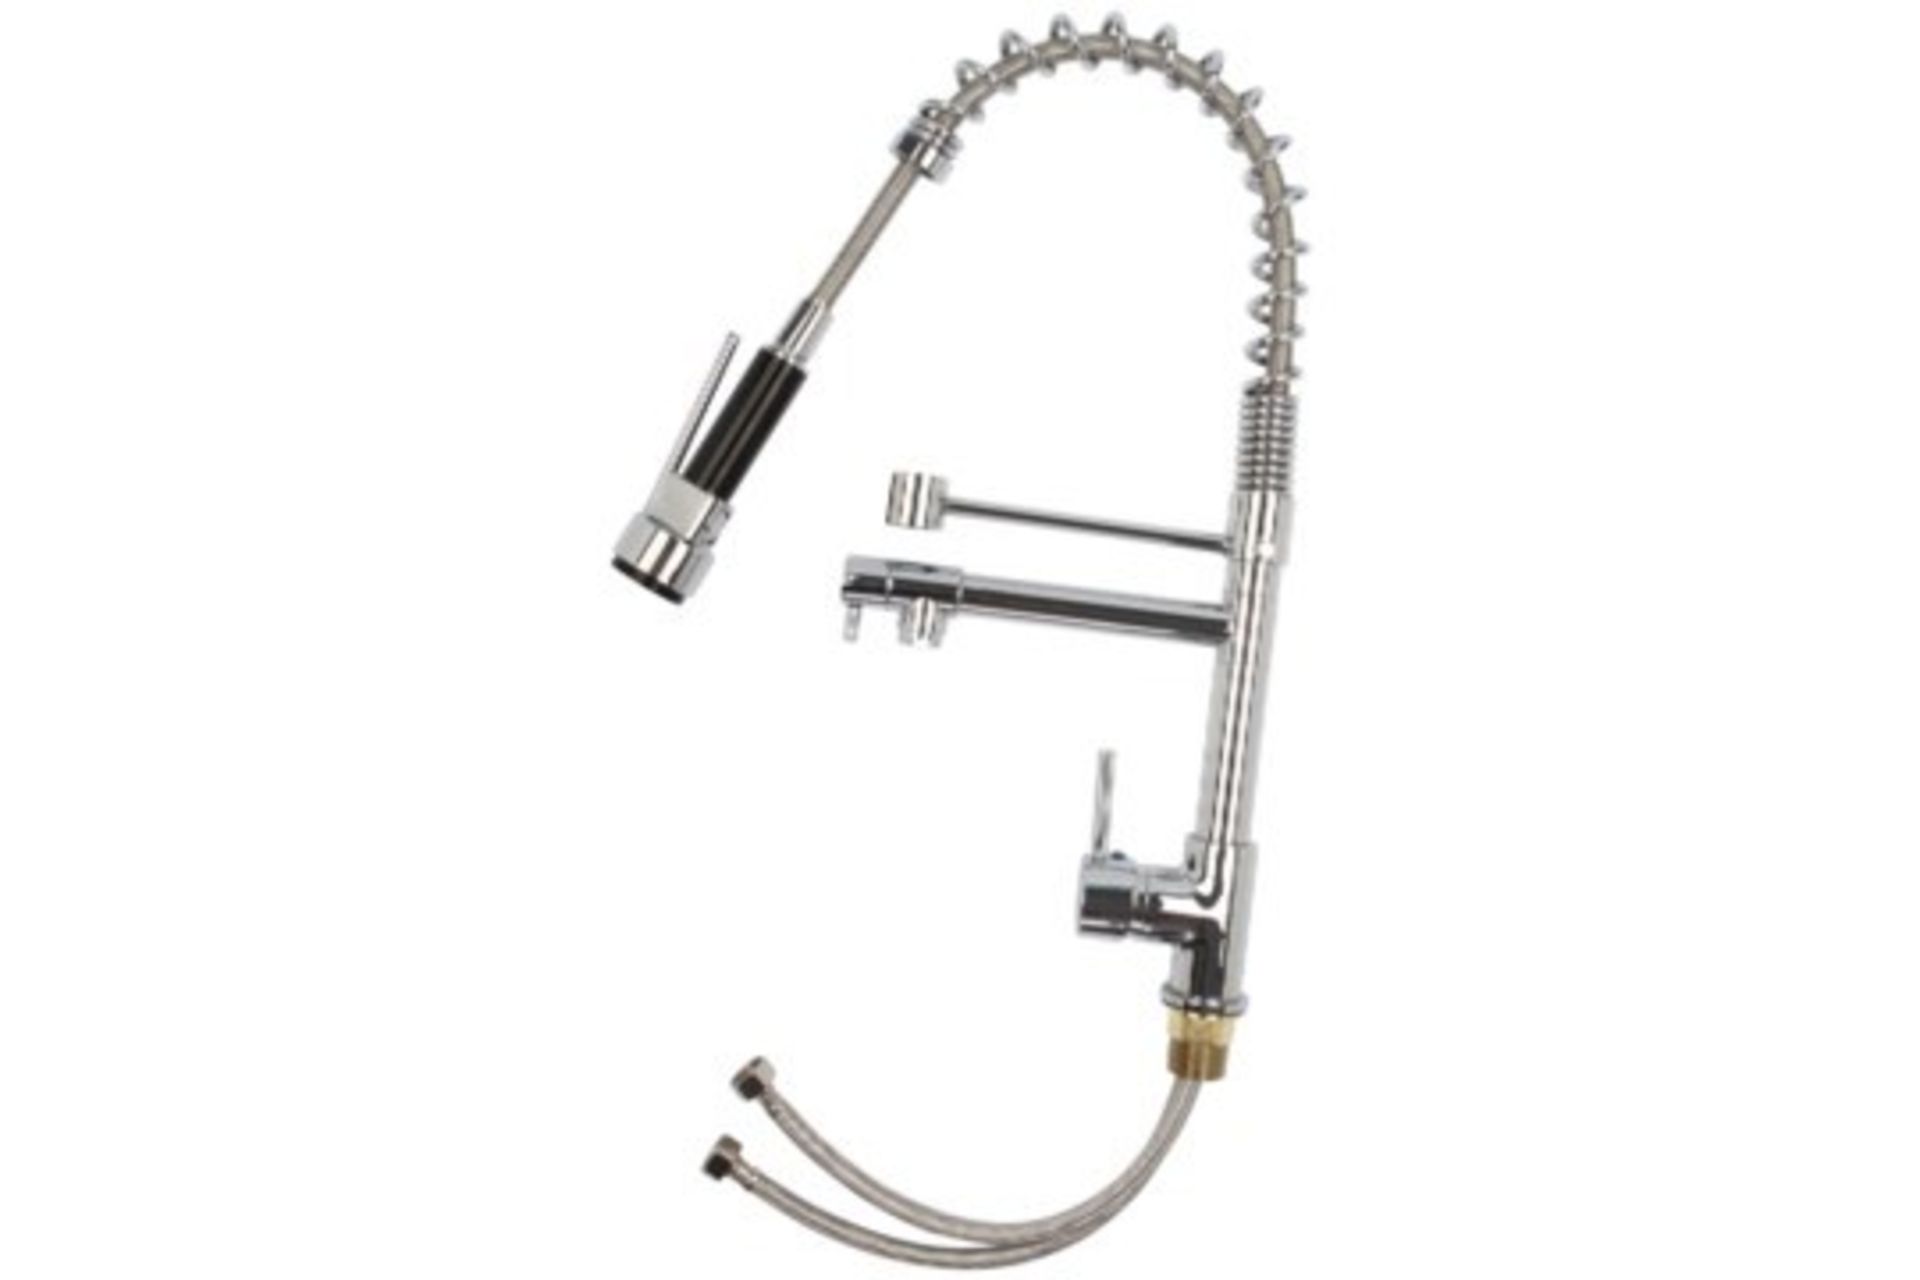 Bentley Modern Monobloc Chrome Brass Pull Out Spray Mixer Tap. RRP £349.99.This tap is from ou... - Image 2 of 2